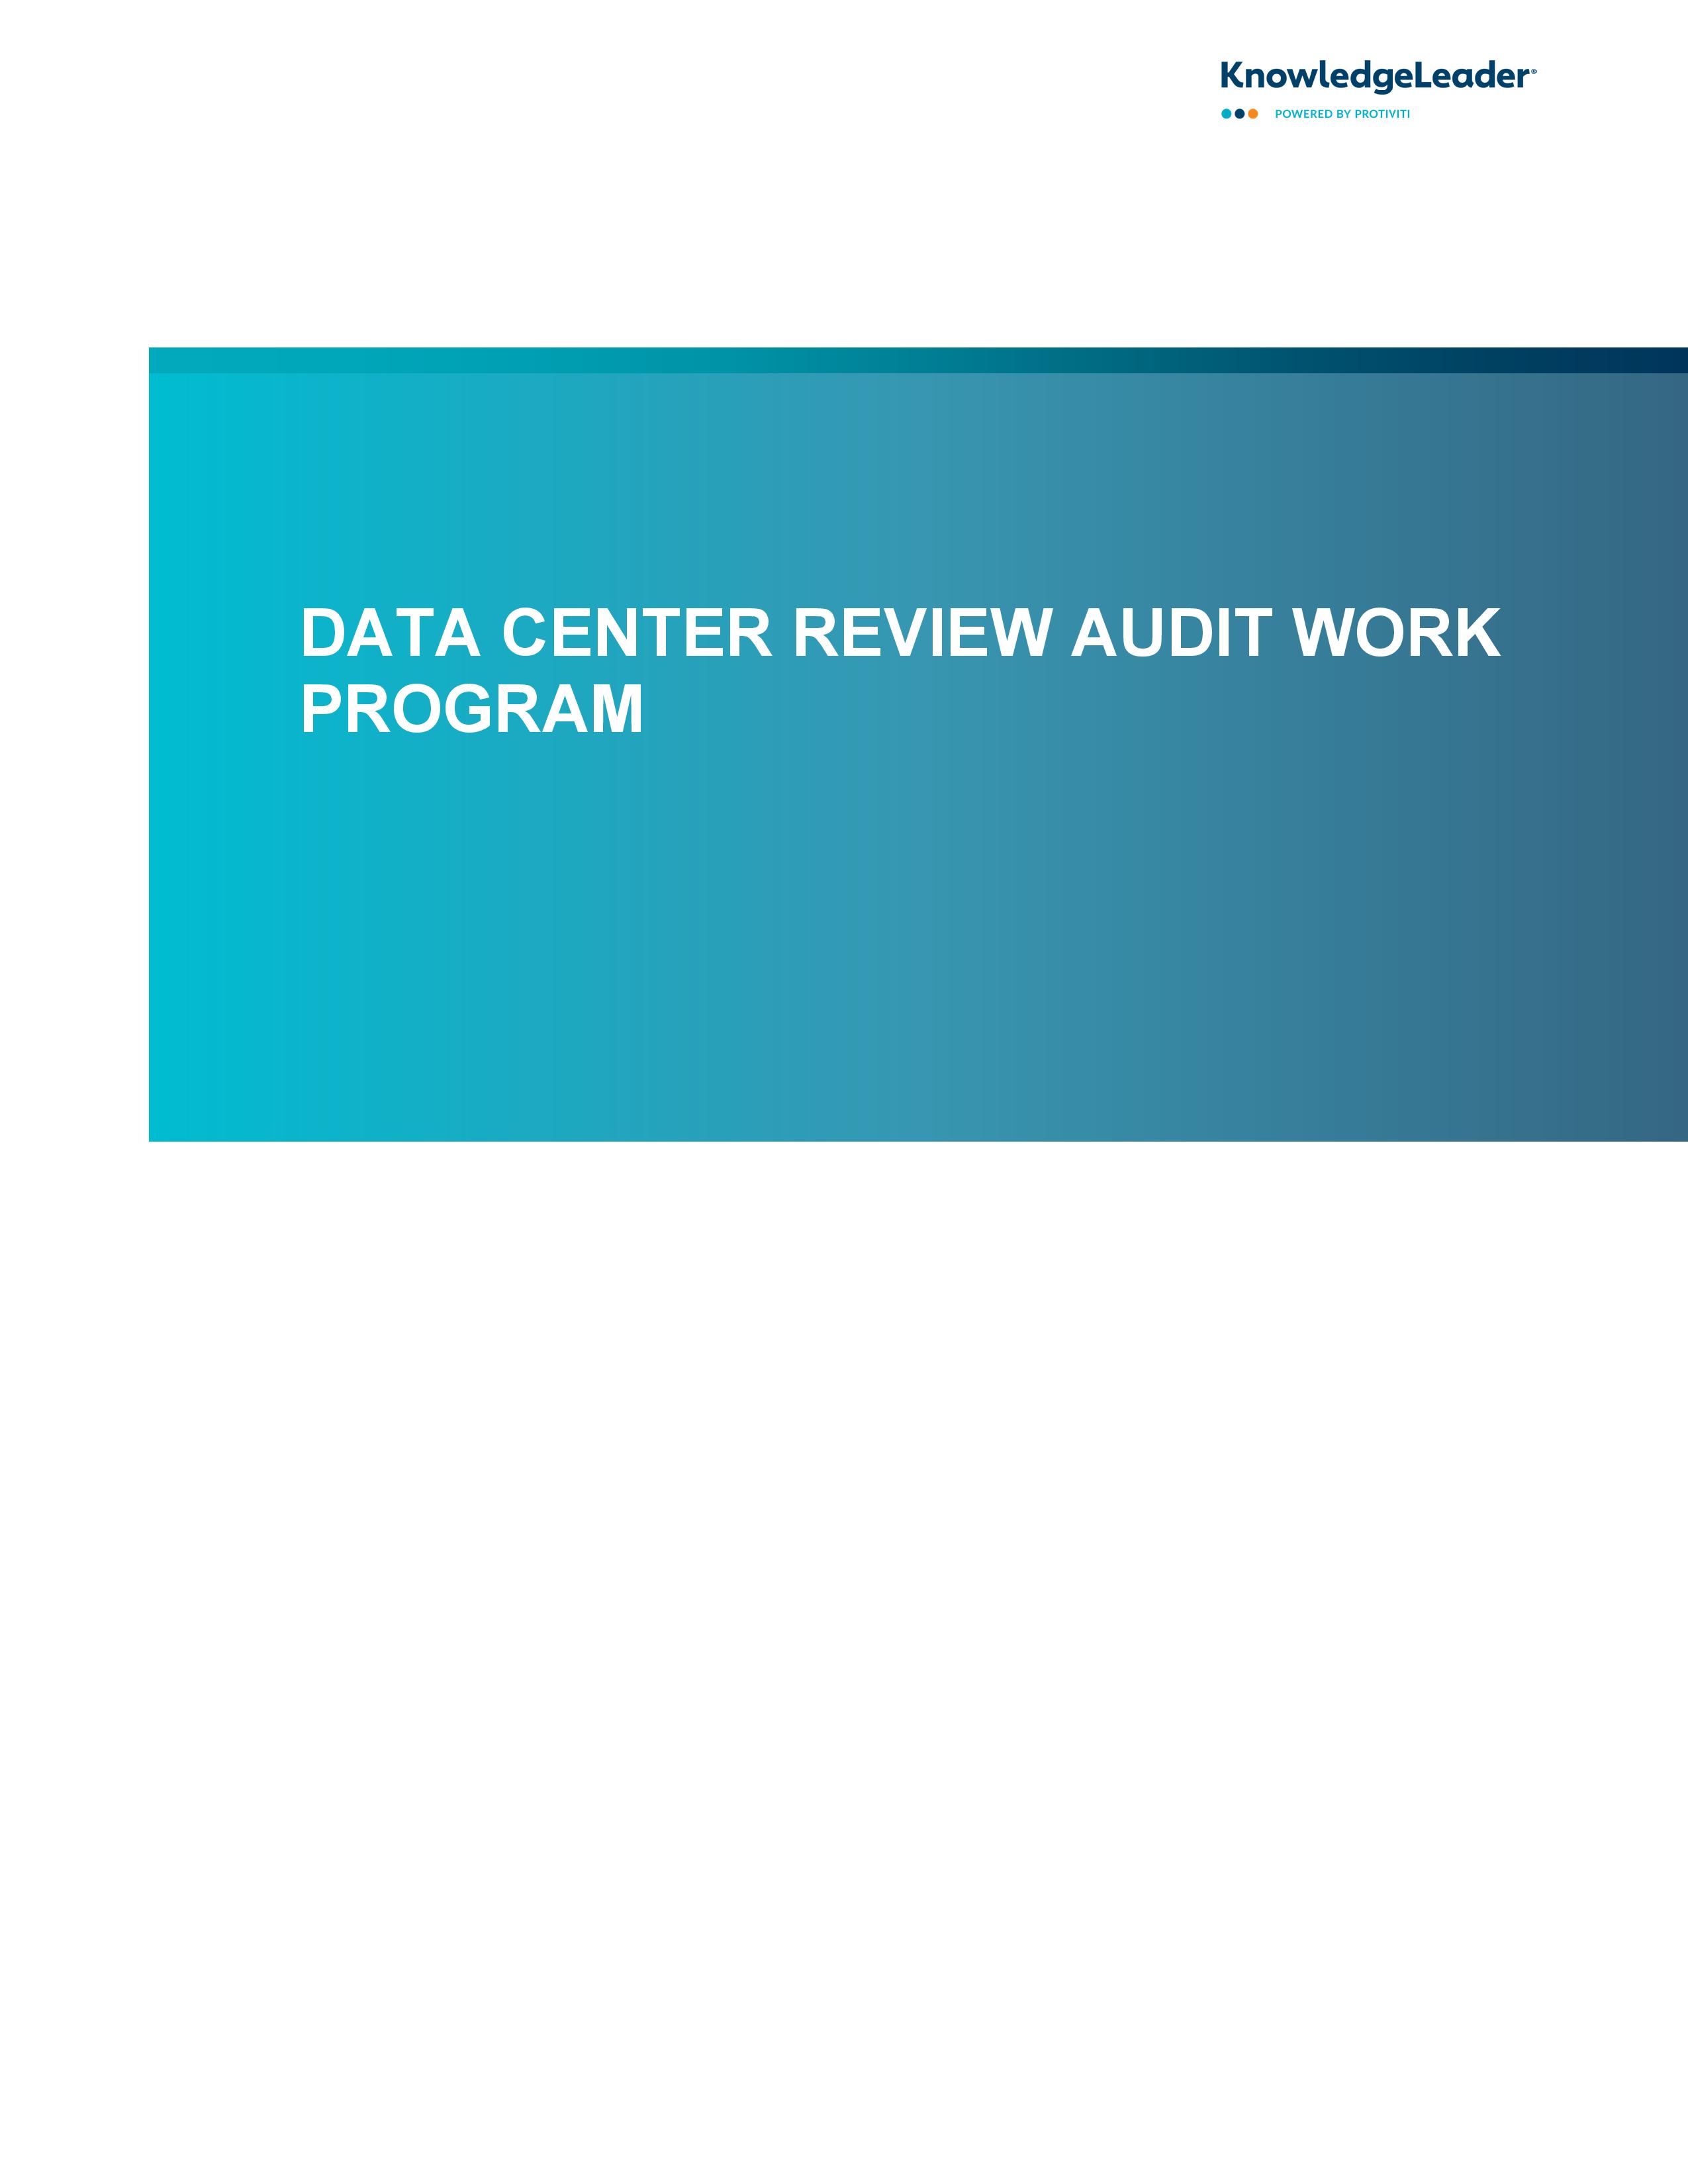 Screenshot of the first page of Data Center Review Audit Work Program